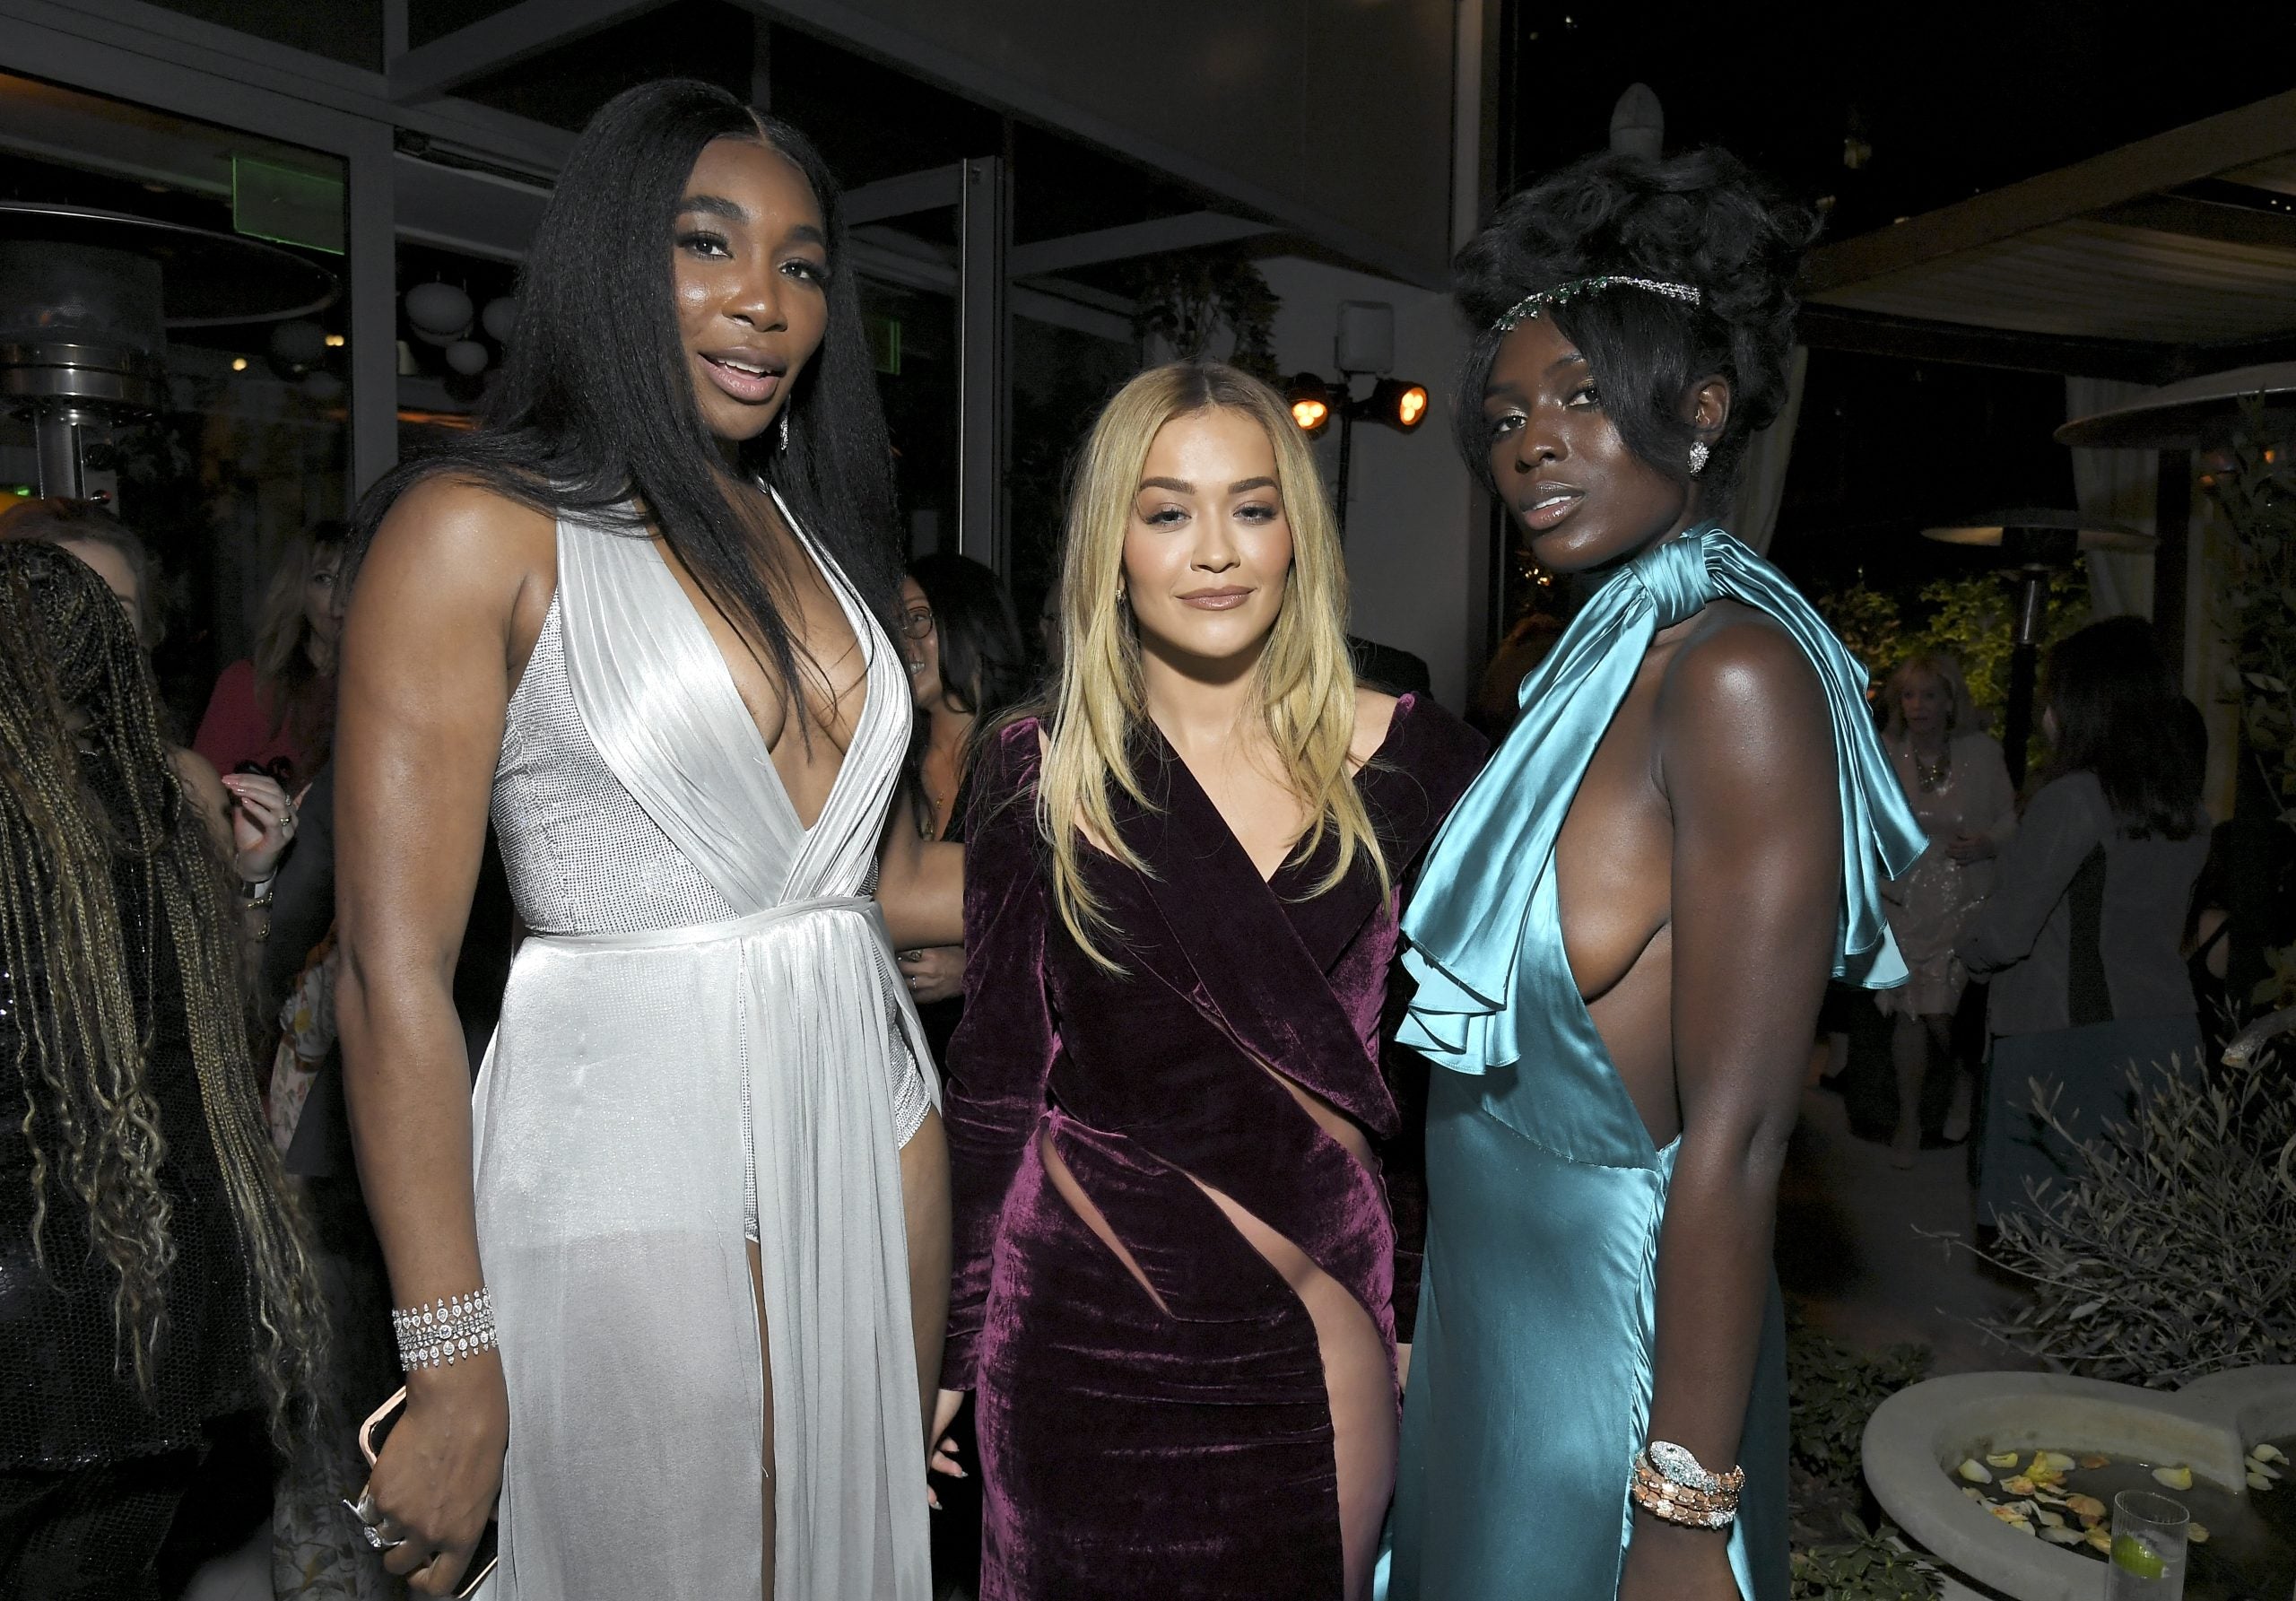 Star Gazing: Rihanna, The Williams Sisters, Jodie Turner-Smith, And More